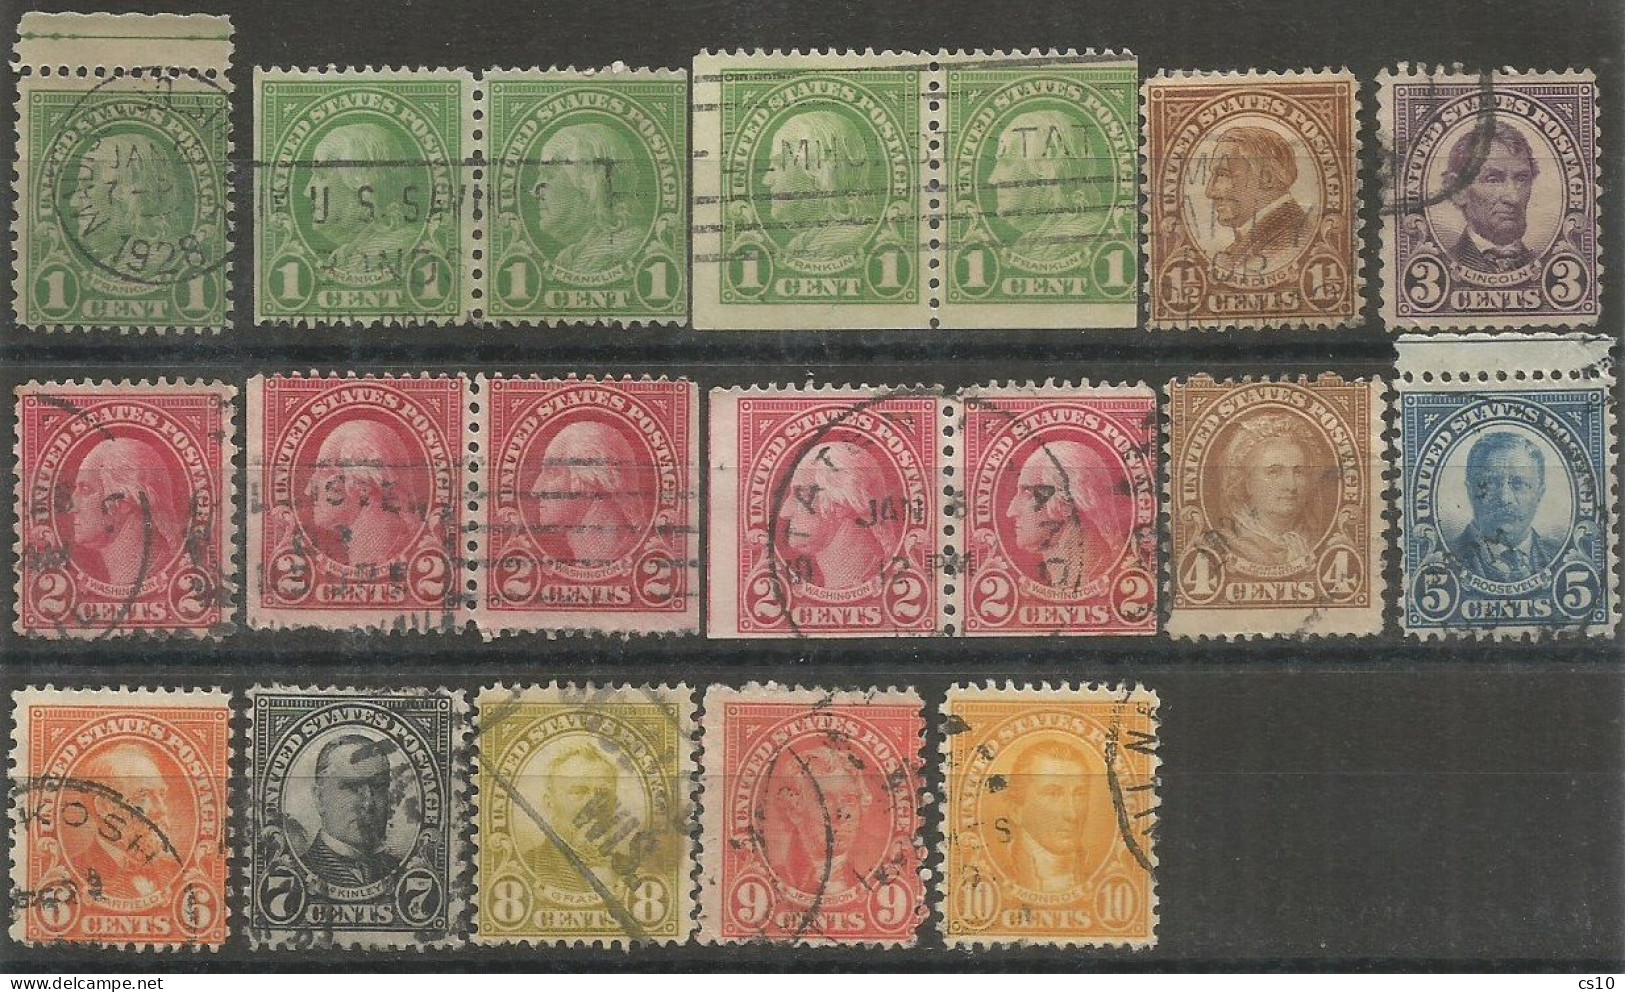 USA 1926/28 Prexies Rotary Stamps  Perf.11x10.5 Cpl 11v Set SC.#632/42 VFU Incl. C1+c2 From BKLT 2+2, 3+3 Pairs !!! - Full Years